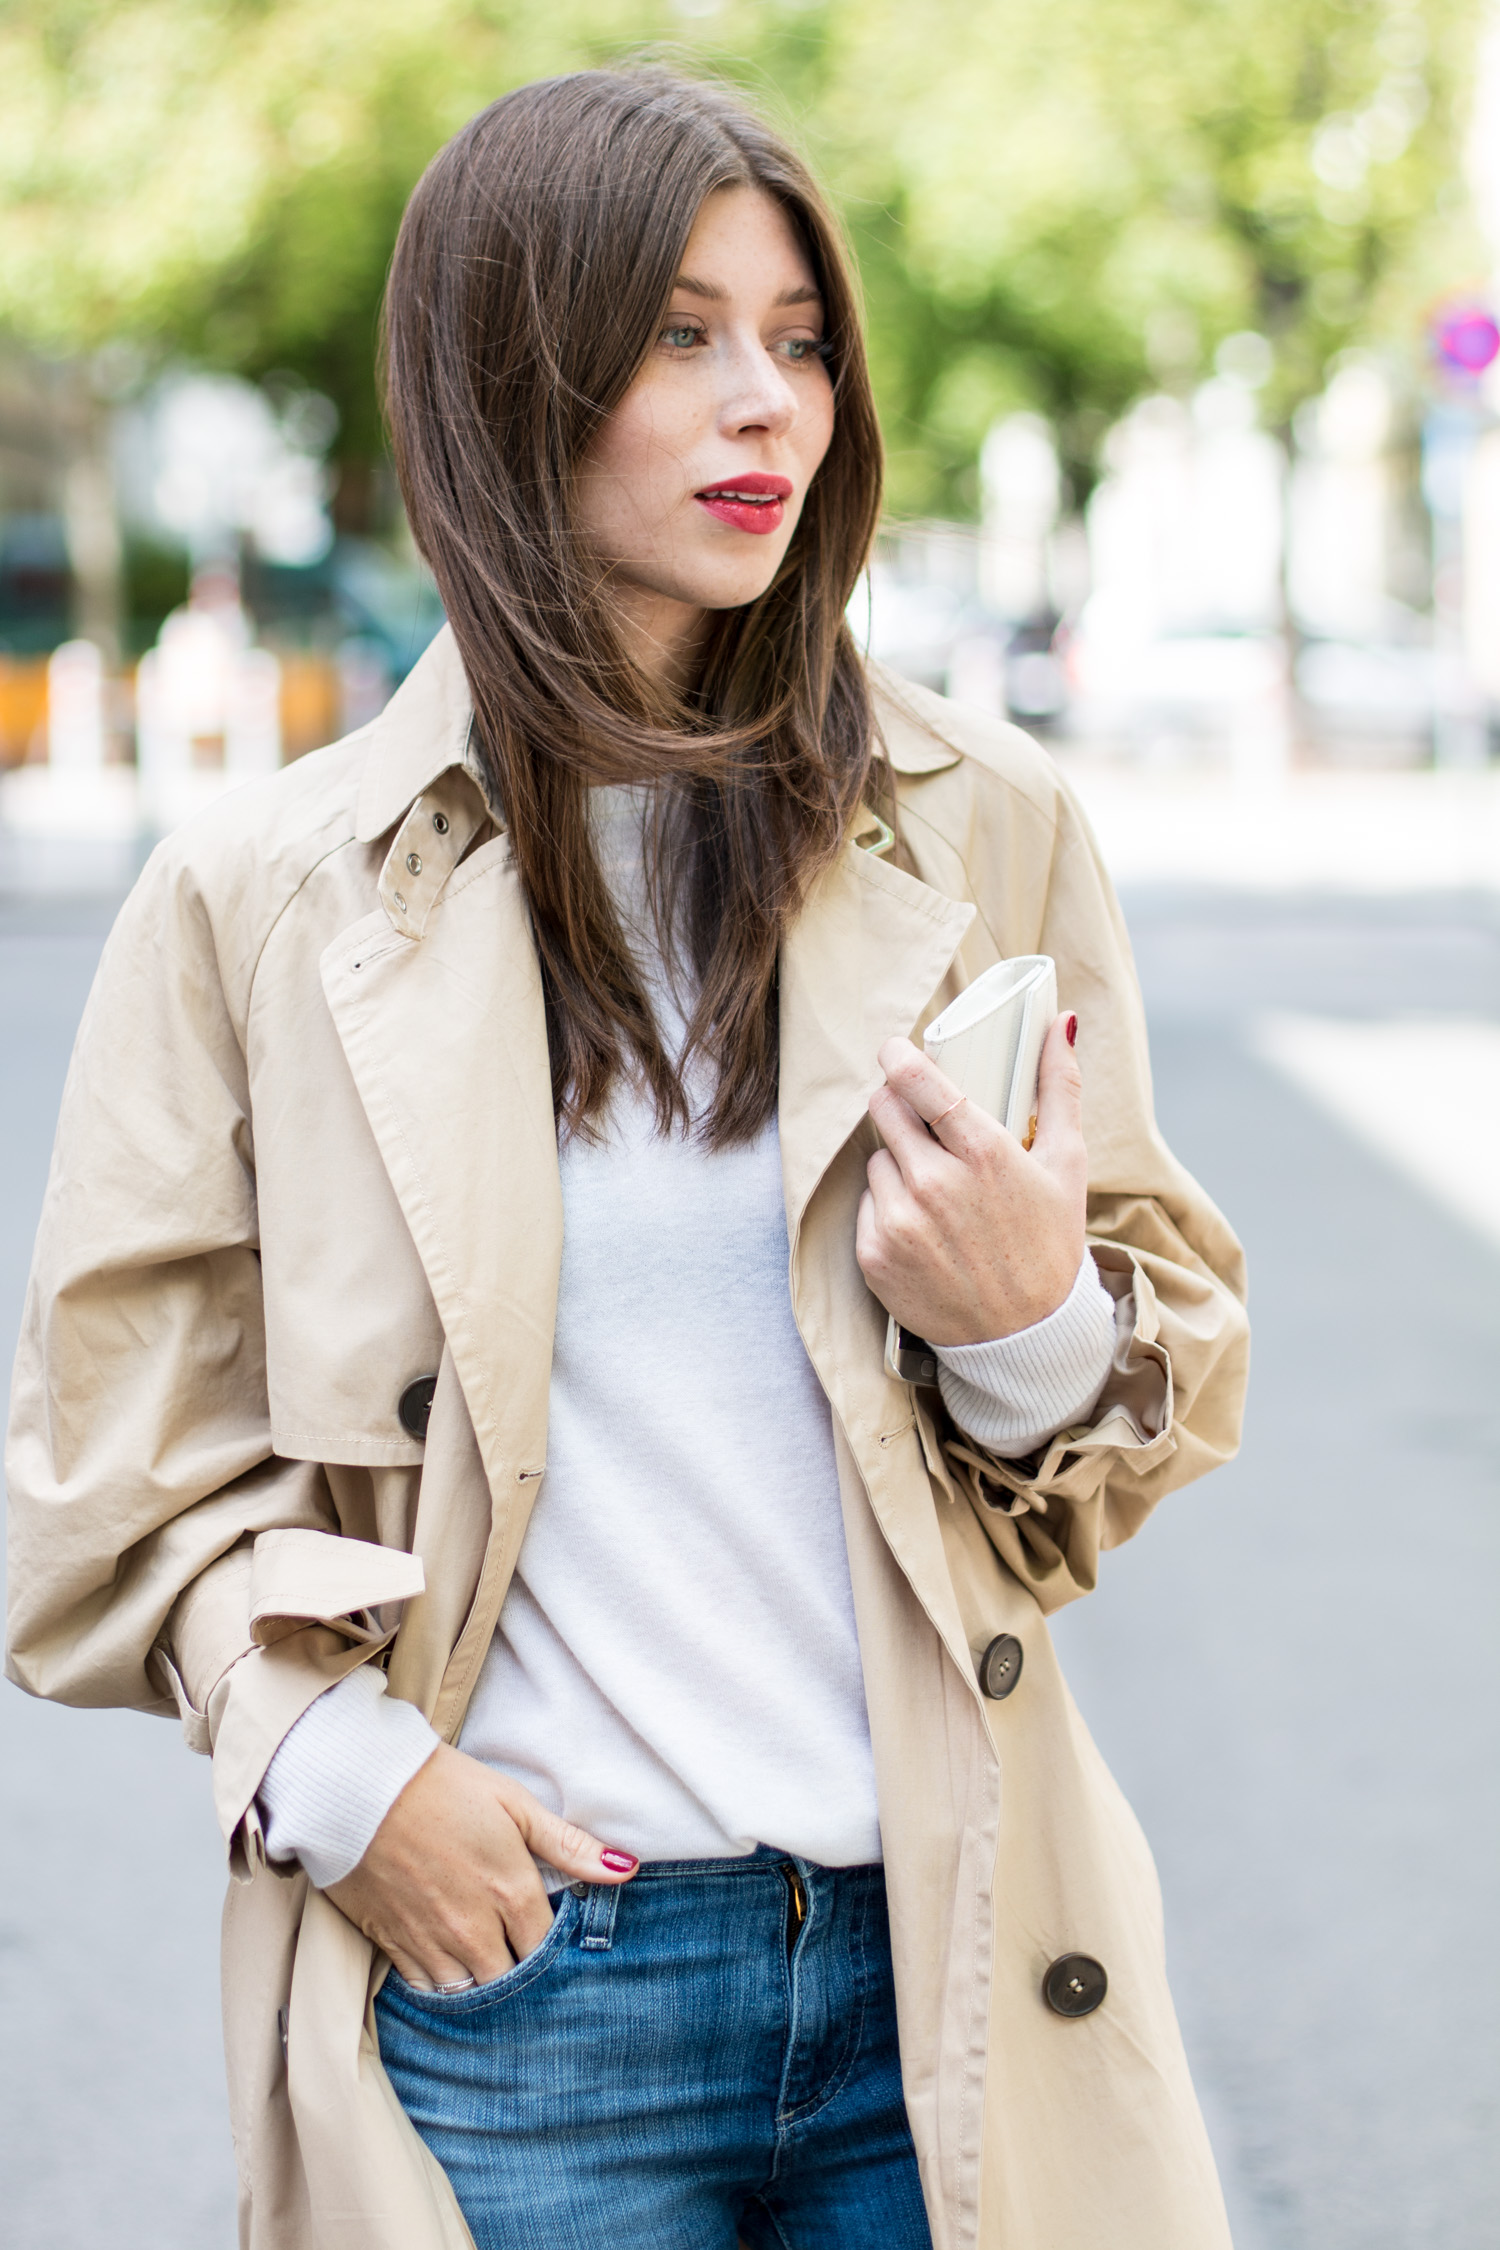 French Chic | The Daily Dose